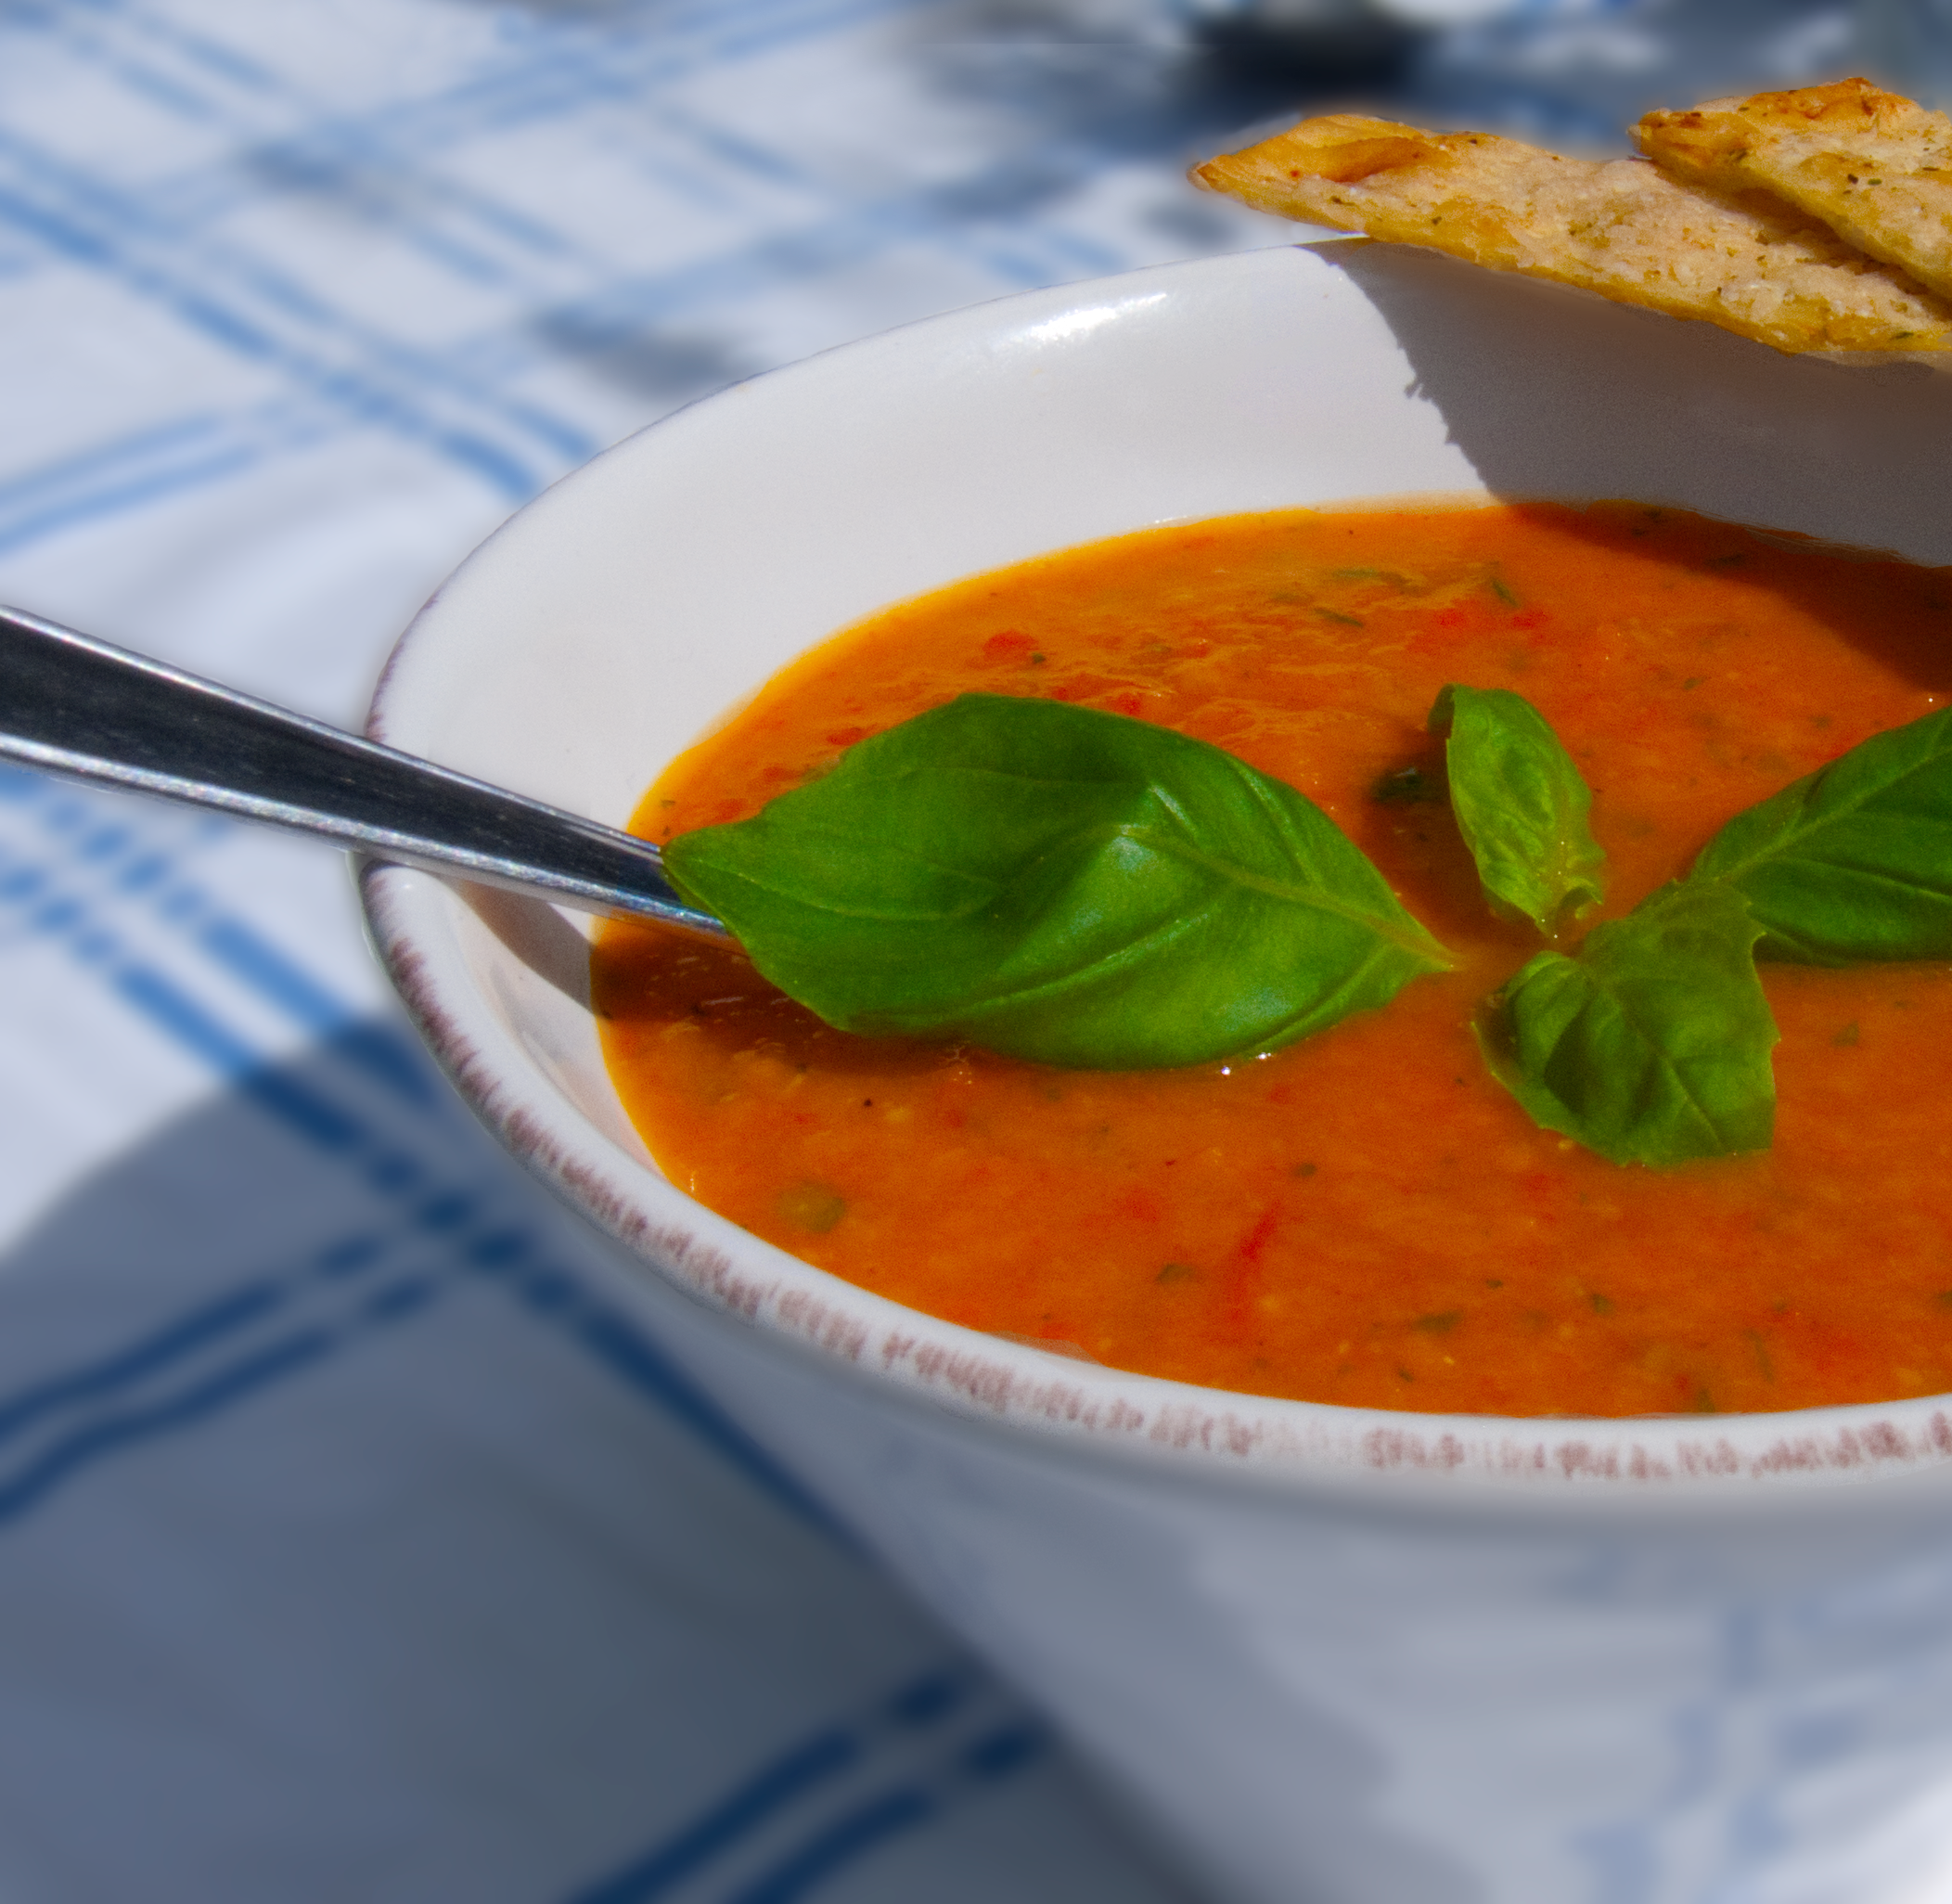 Tomato Soup With Grilled Red Peppers – Served with Parmesan Sticks